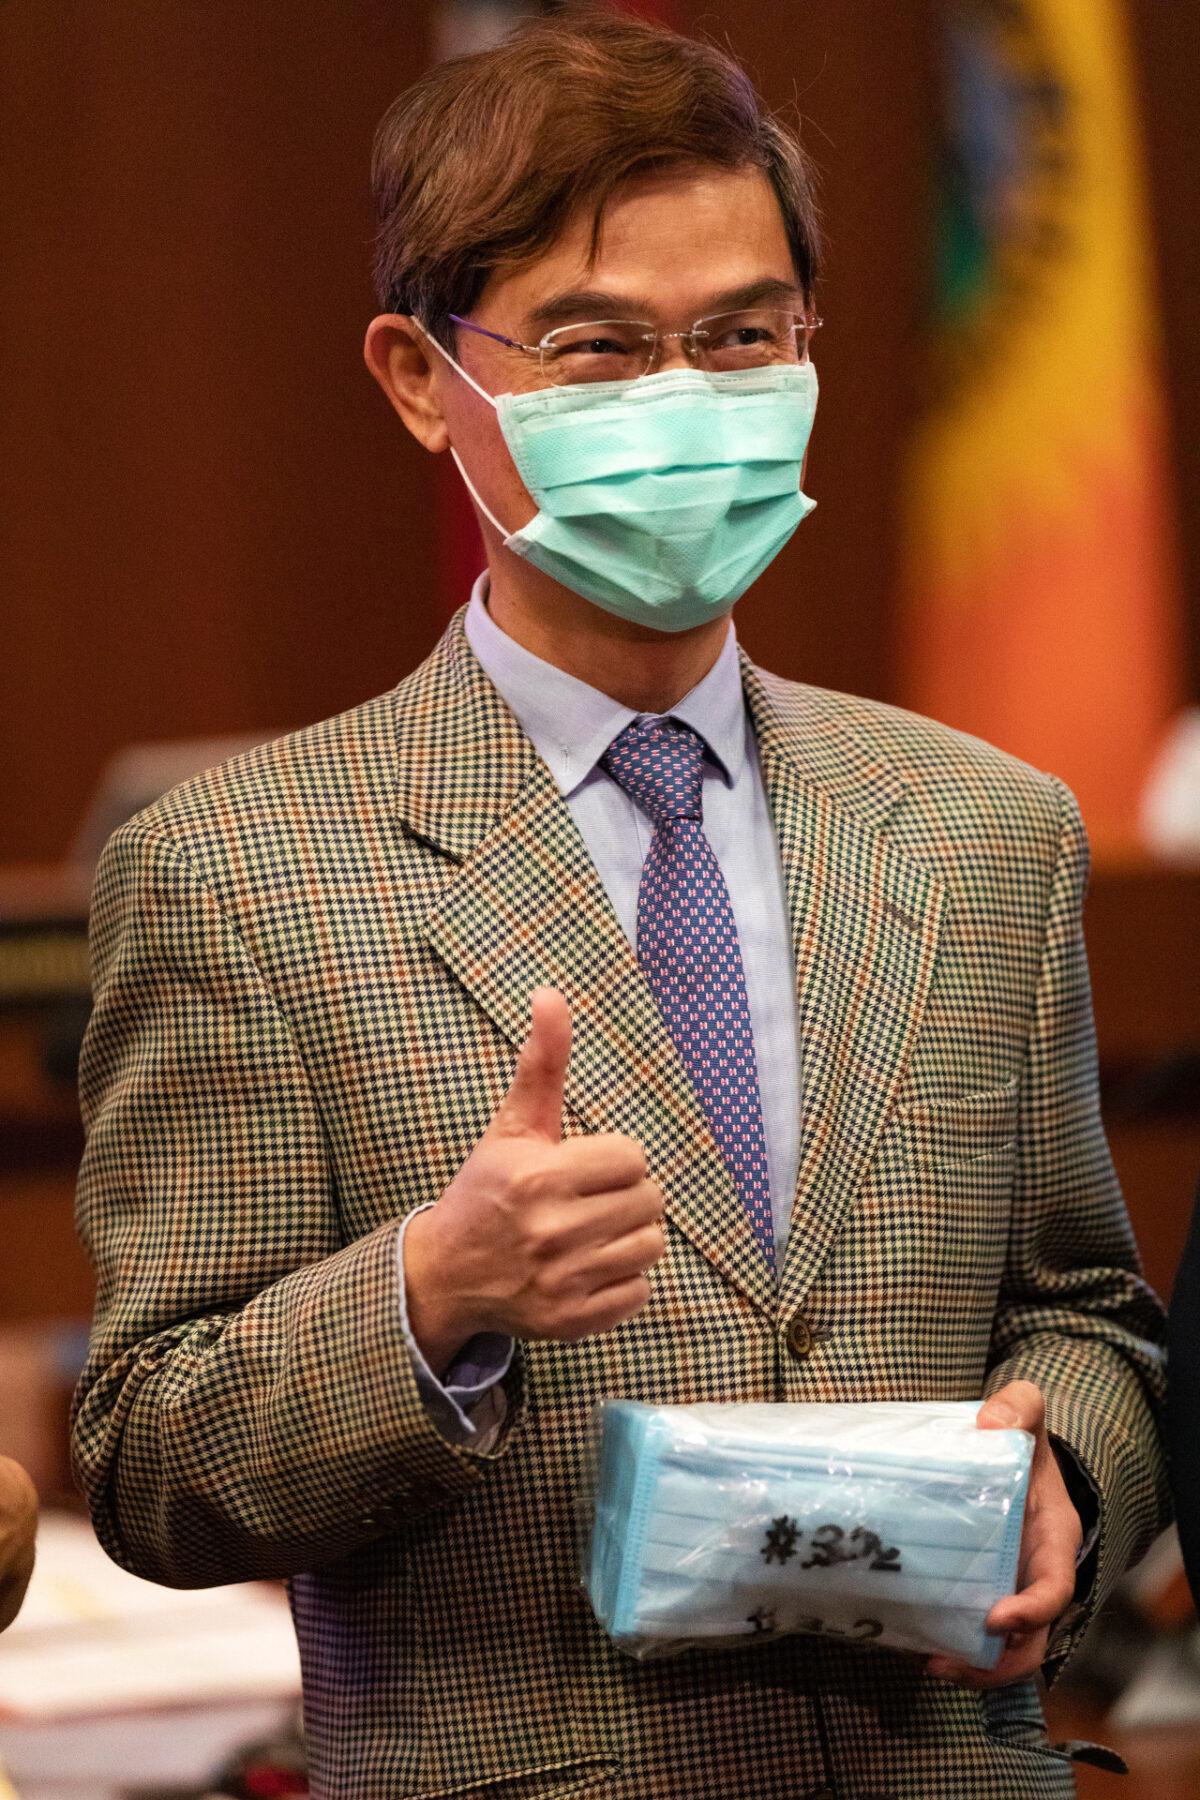 Ambassador Abraham Wen-Shang Chu gives a thumbs up to one package of the 20,000 surgical masks donated by Taiwan to help Orange County combat the COVID-19 pandemic in Santa Ana, Calif., on June 16, 2020. (John Fredricks/The Epoch Times)